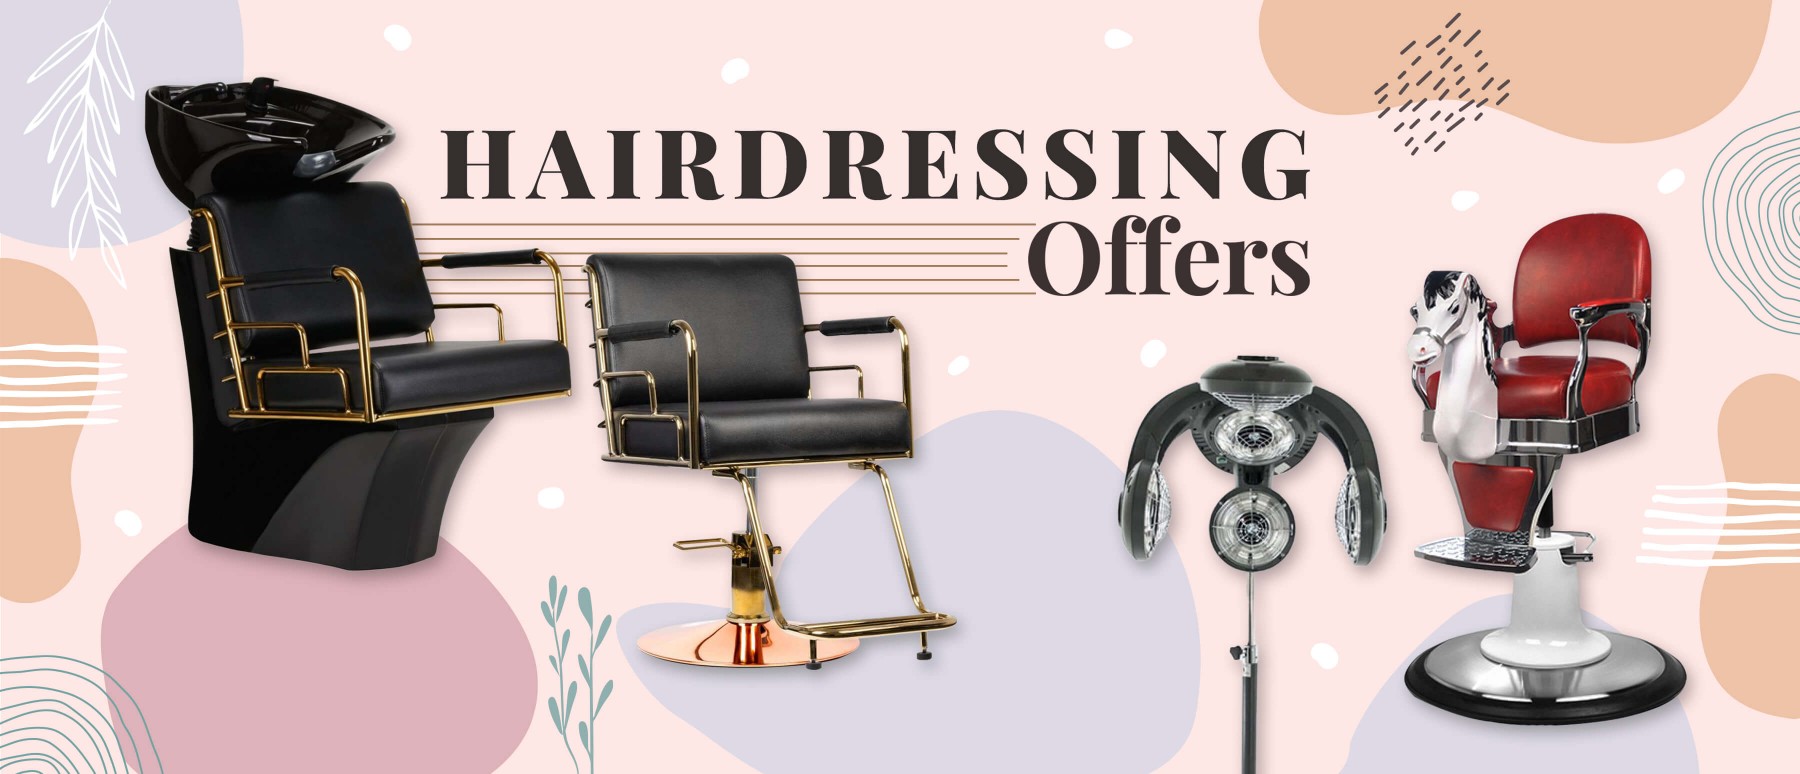 Hairdressing_offers